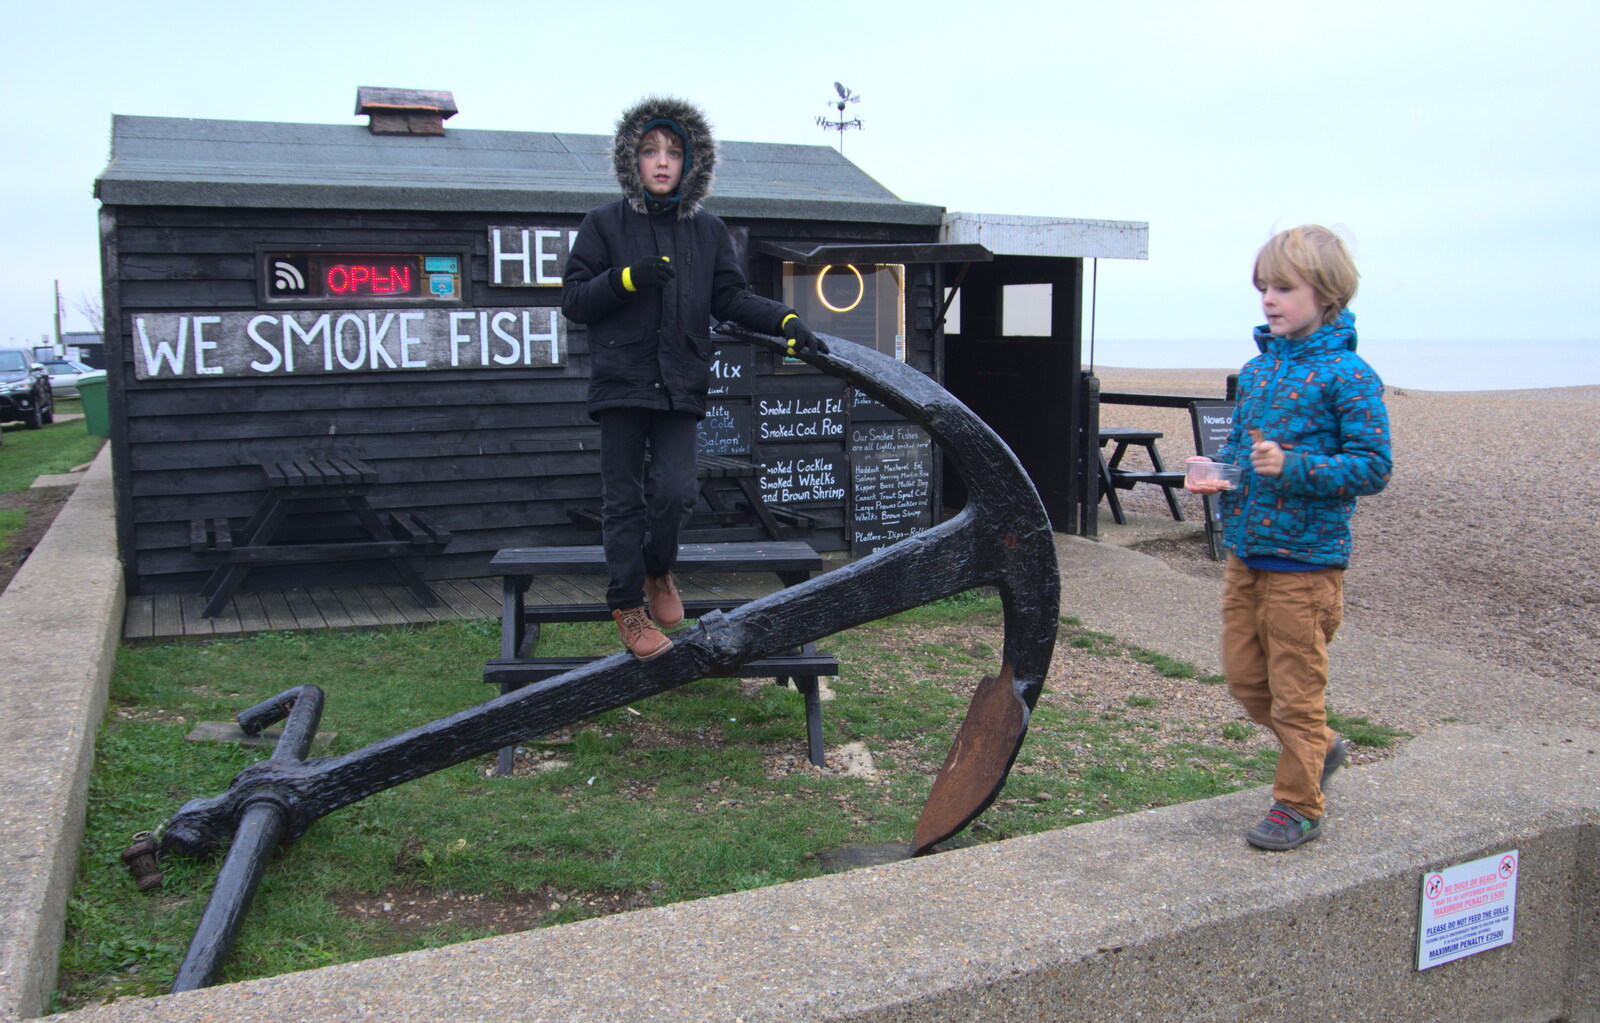 The boys outside the fish shop from A Postcard from Aldeburgh, Suffolk - 6th January 2019